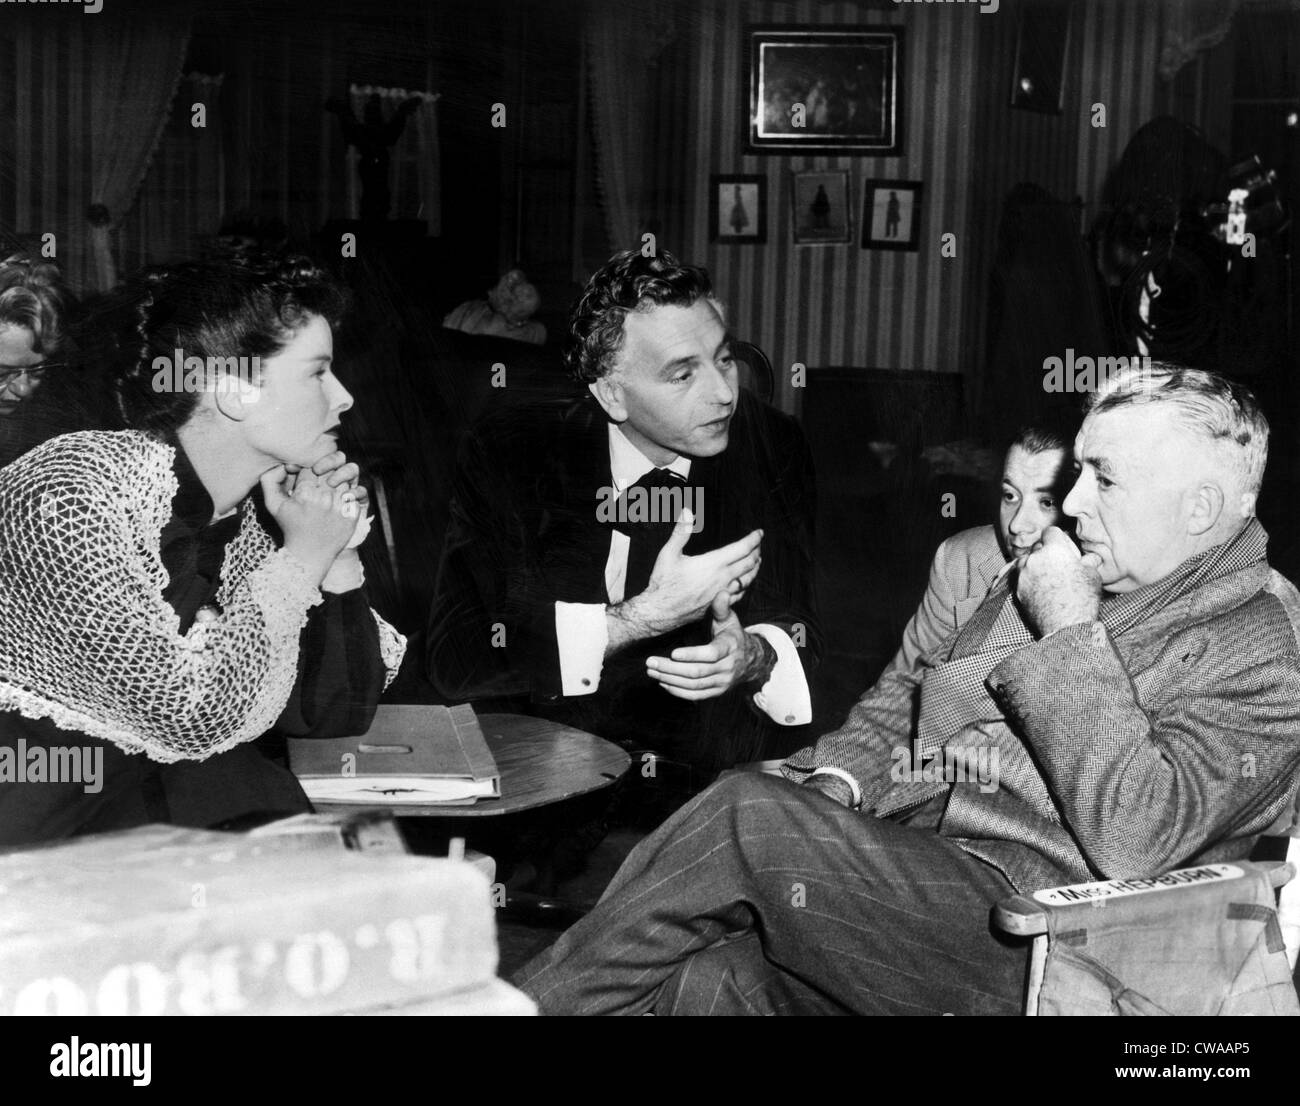 SONG OF LOVE, Katharine Hepburn, Paul Henreid, director Clarence Brown, on set, 1947. Courtesy: CSU Archives/Everett Collection. Stock Photo